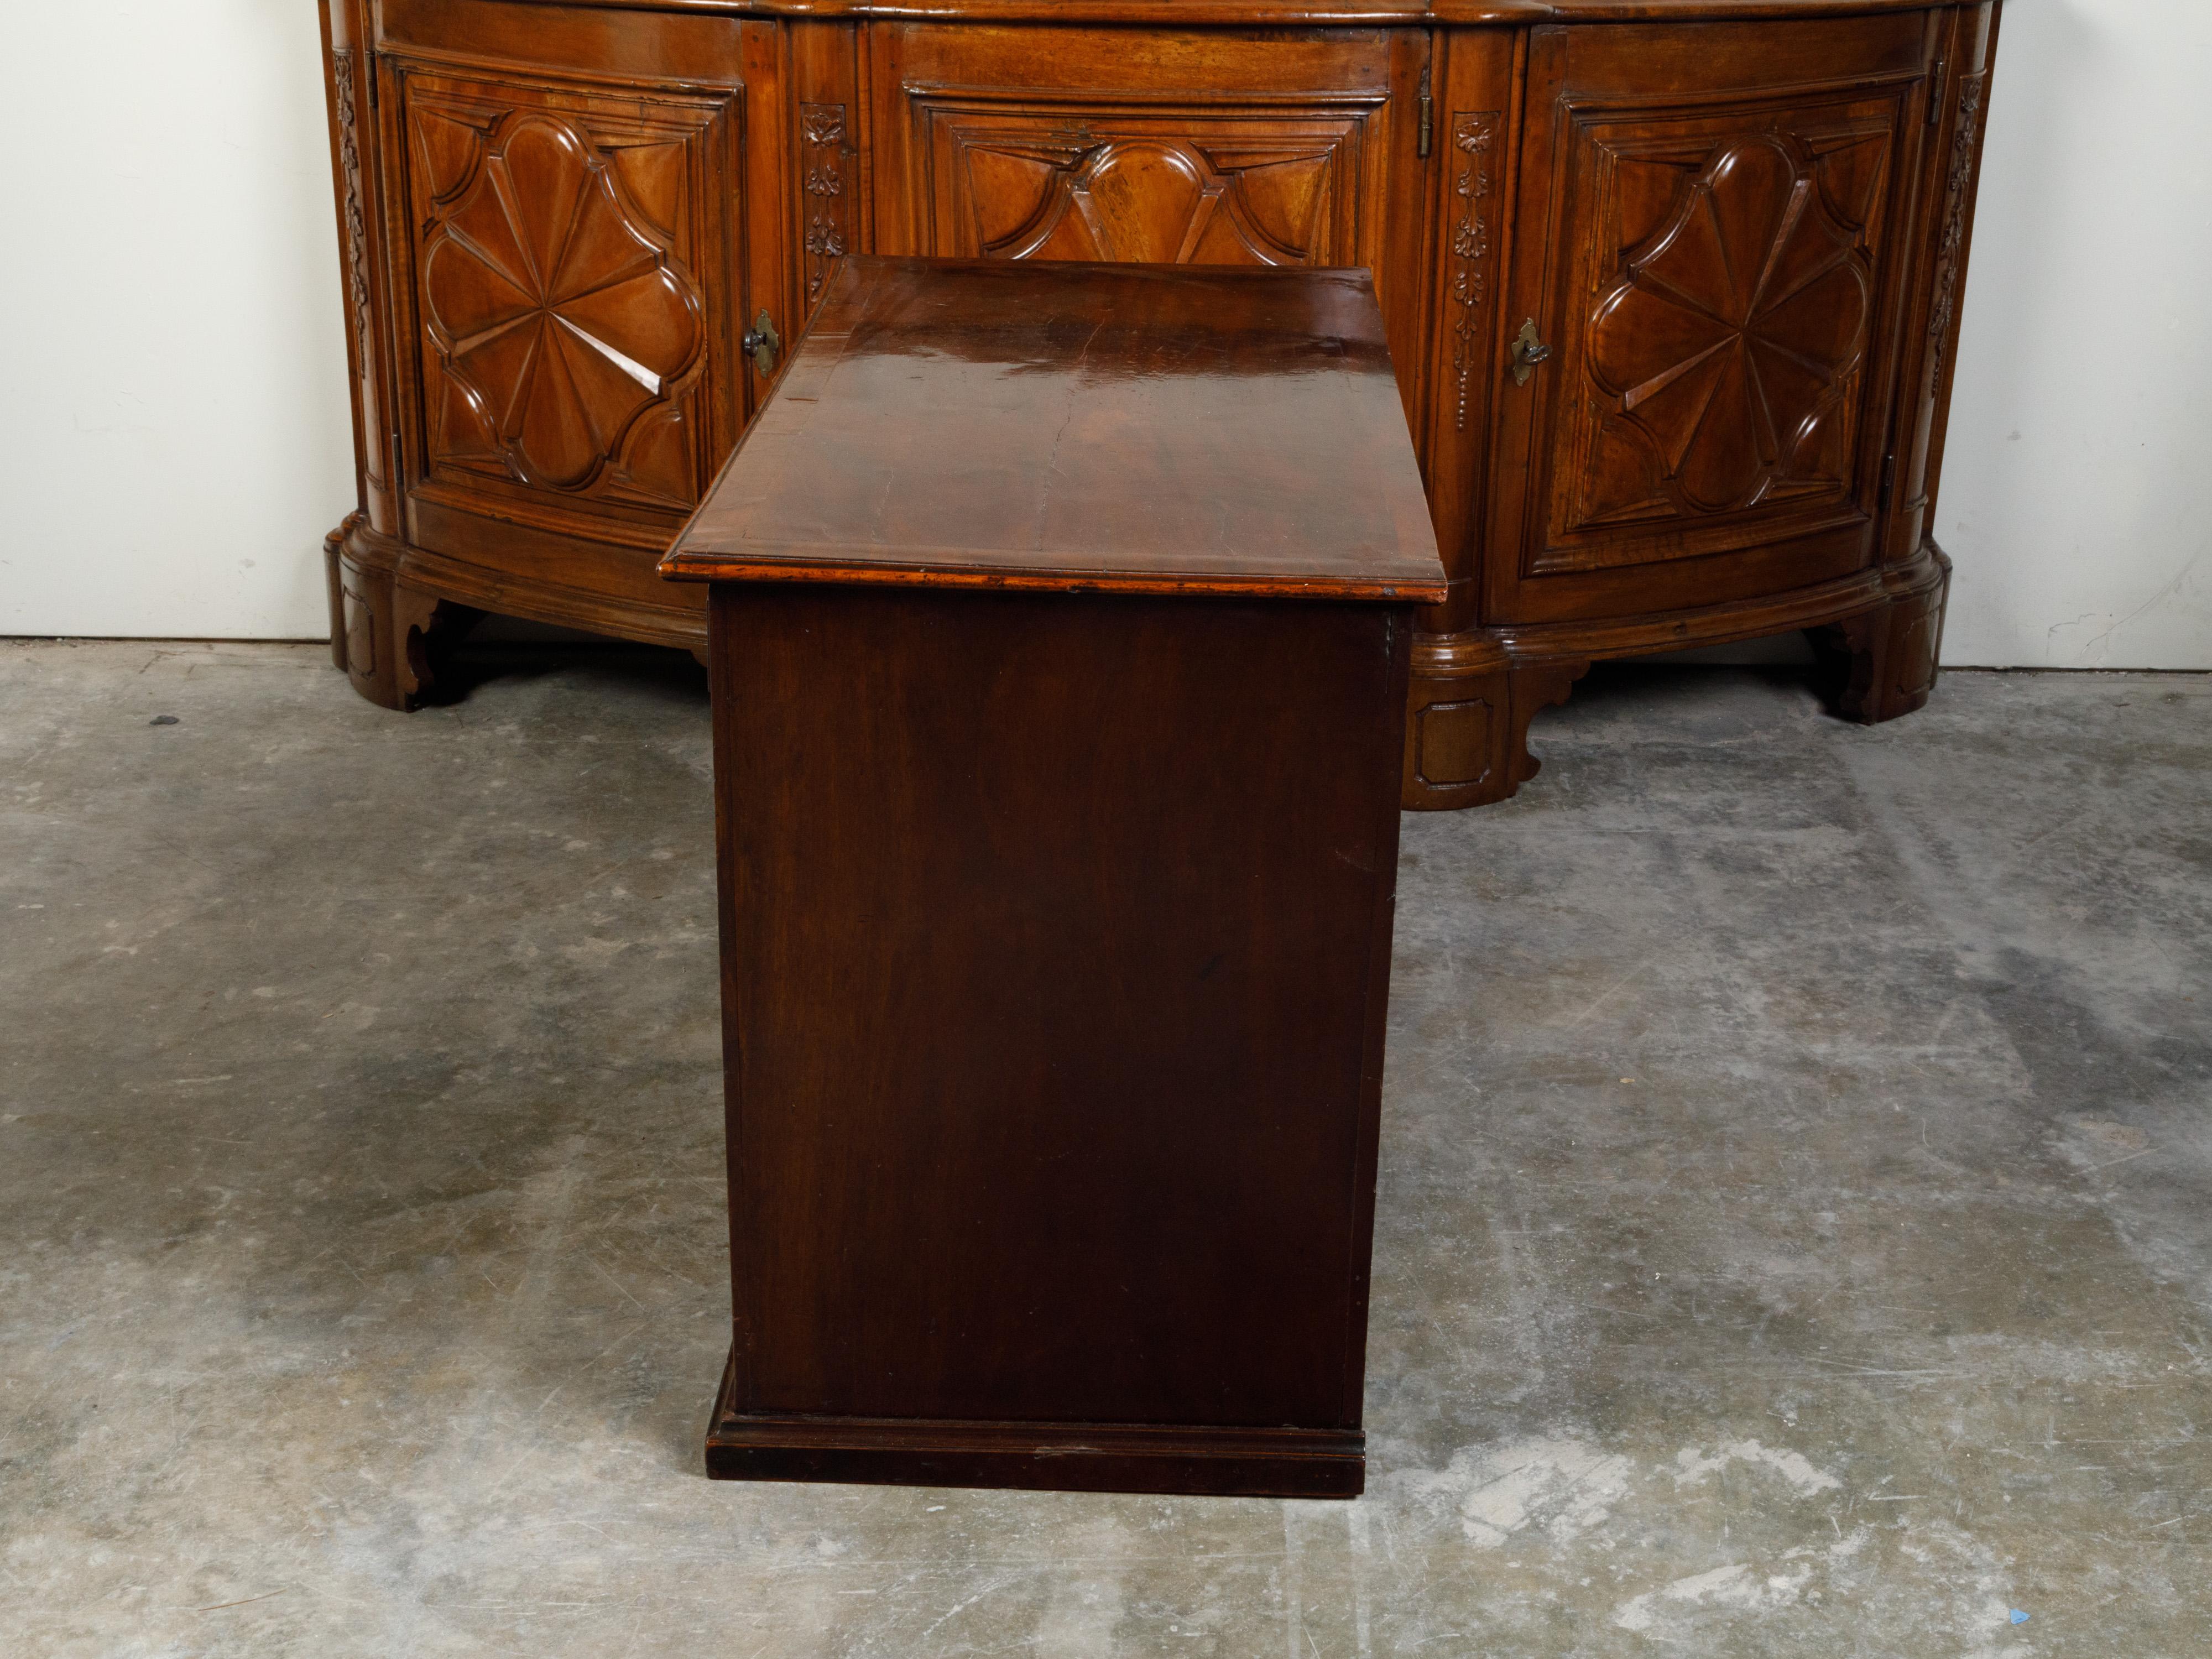 19th Century English Georgian Period Mahogany Desk with Ten Graduating Drawers and Shelf For Sale